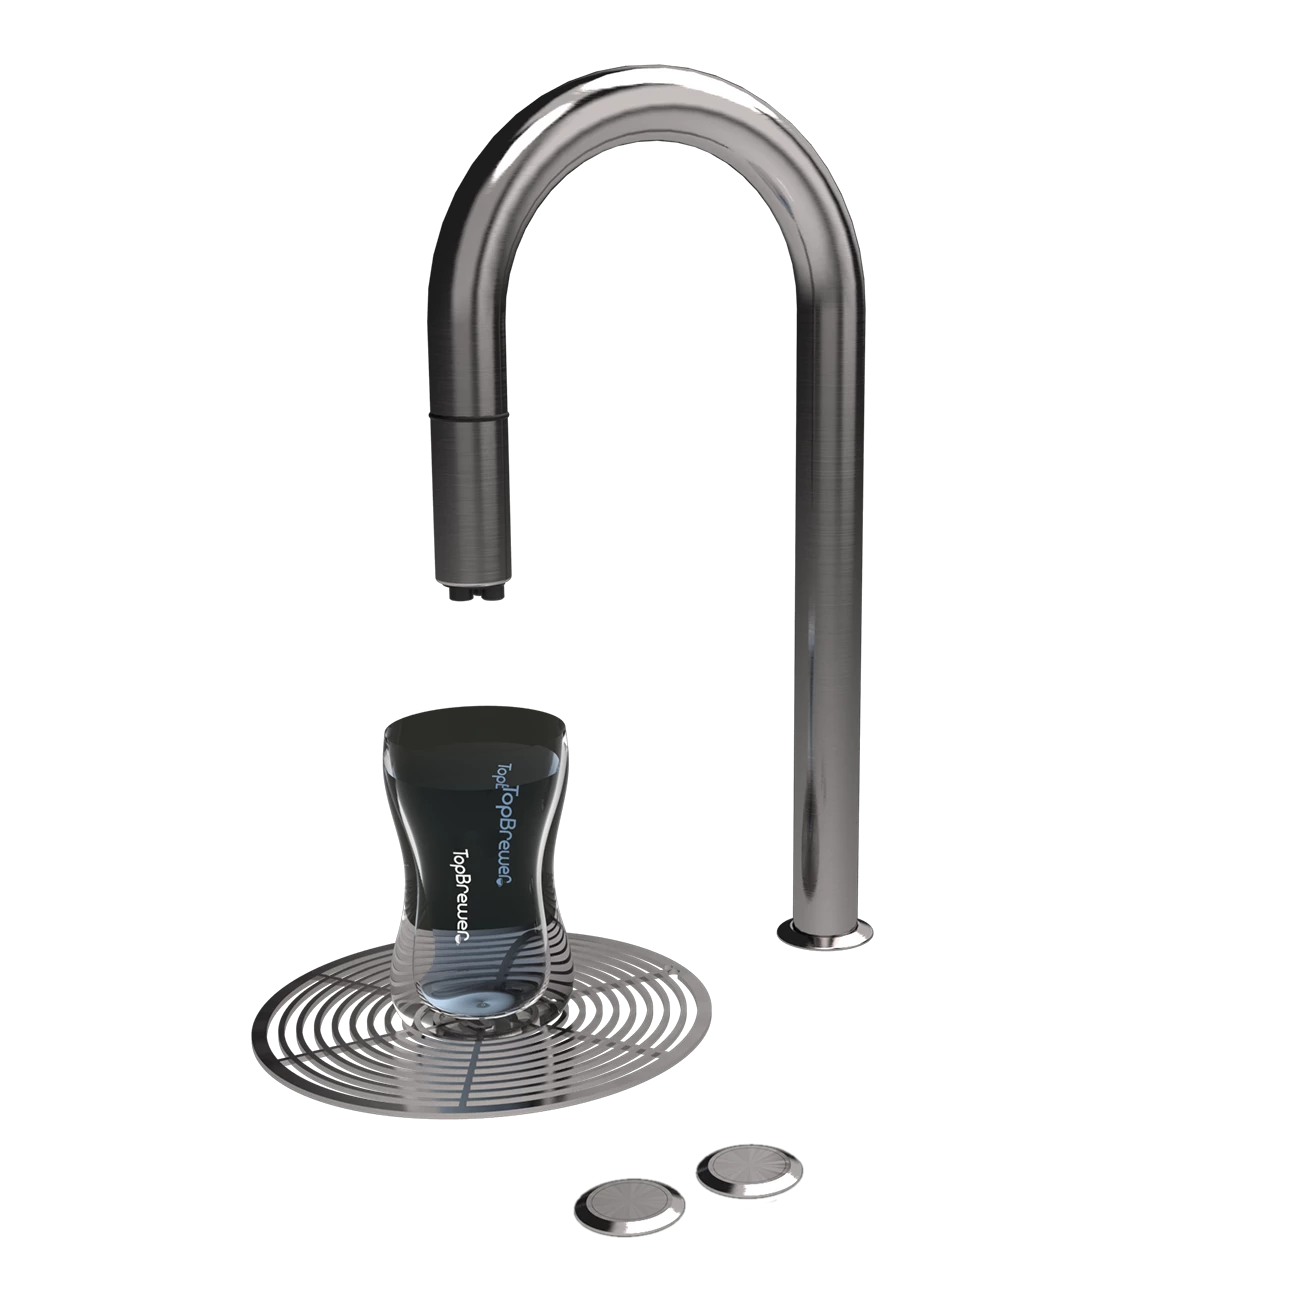 Stainless steel faucet for TopWater dispenser with buttons